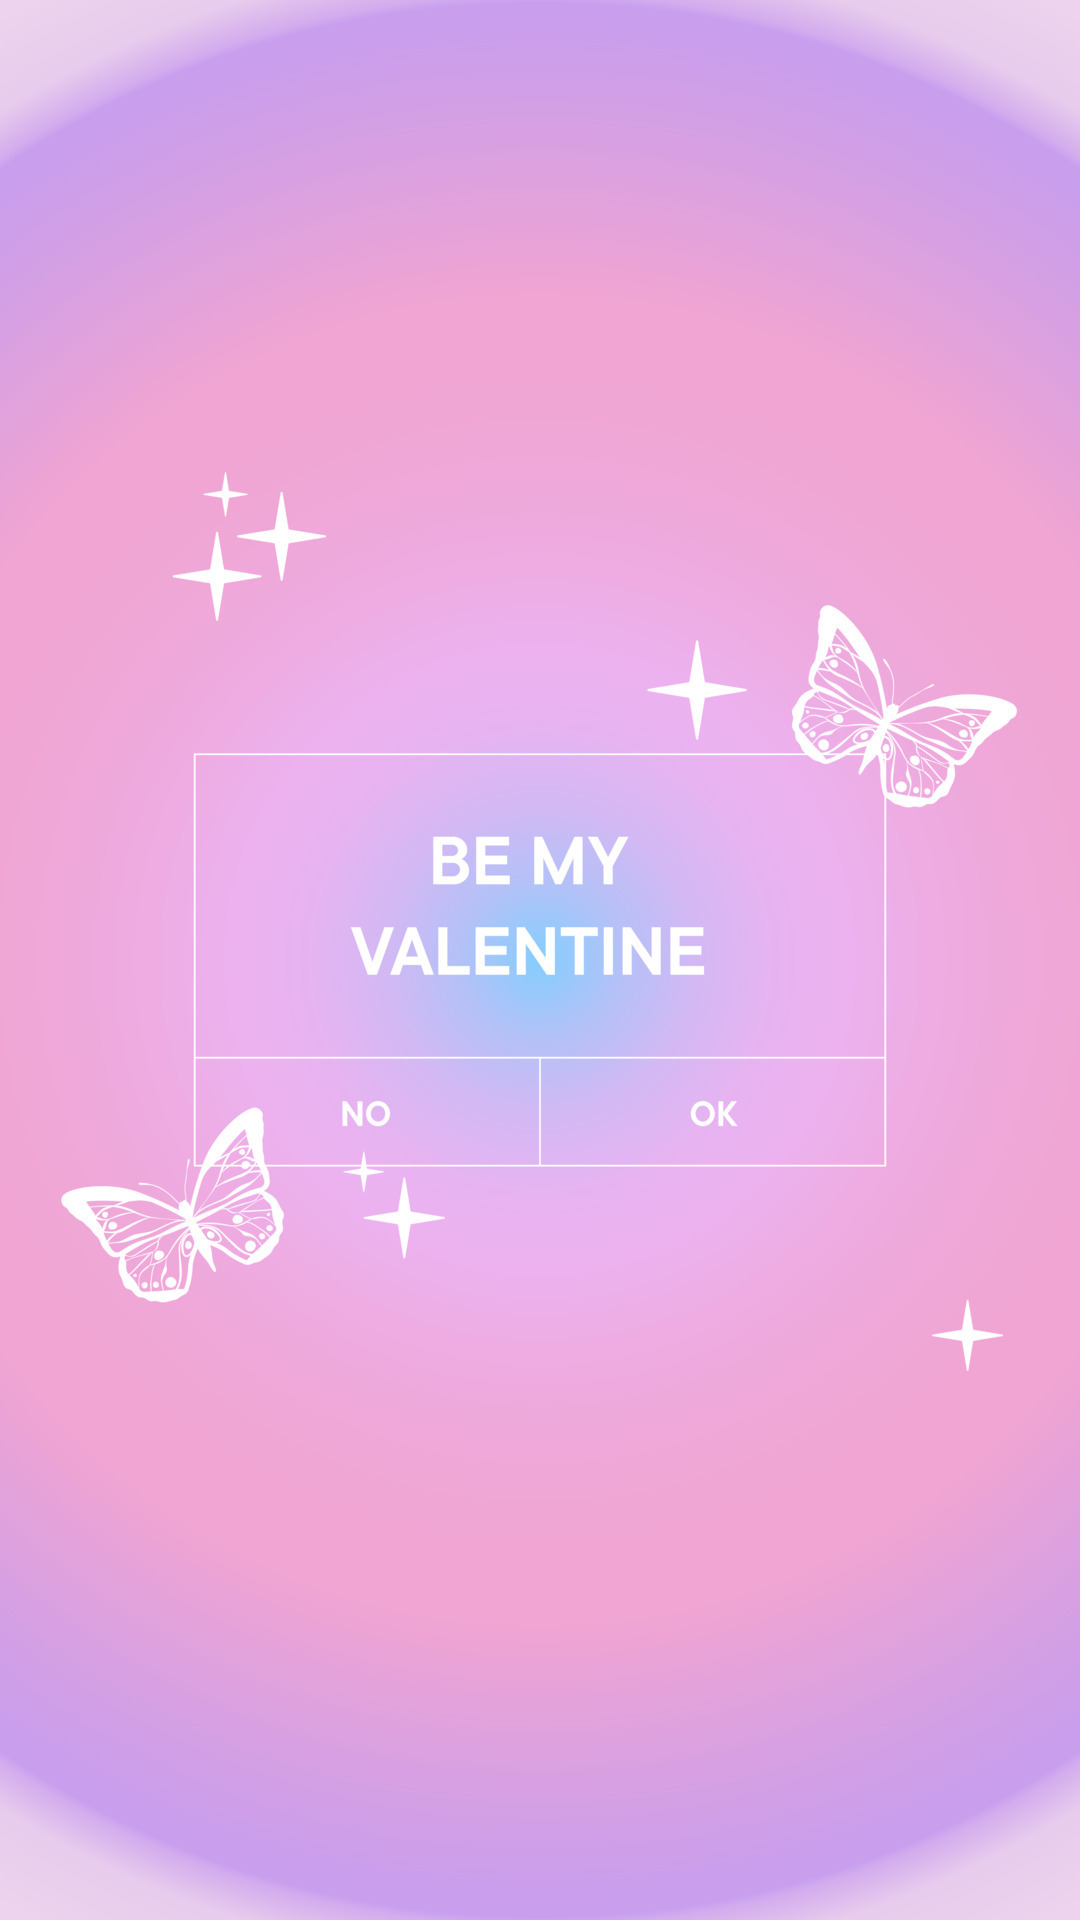 30 Aesthetic Valentines Day Wallpapers  The Beauty May  Valentines  inspiration Valentines wallpaper iphone Valentines wallpaper